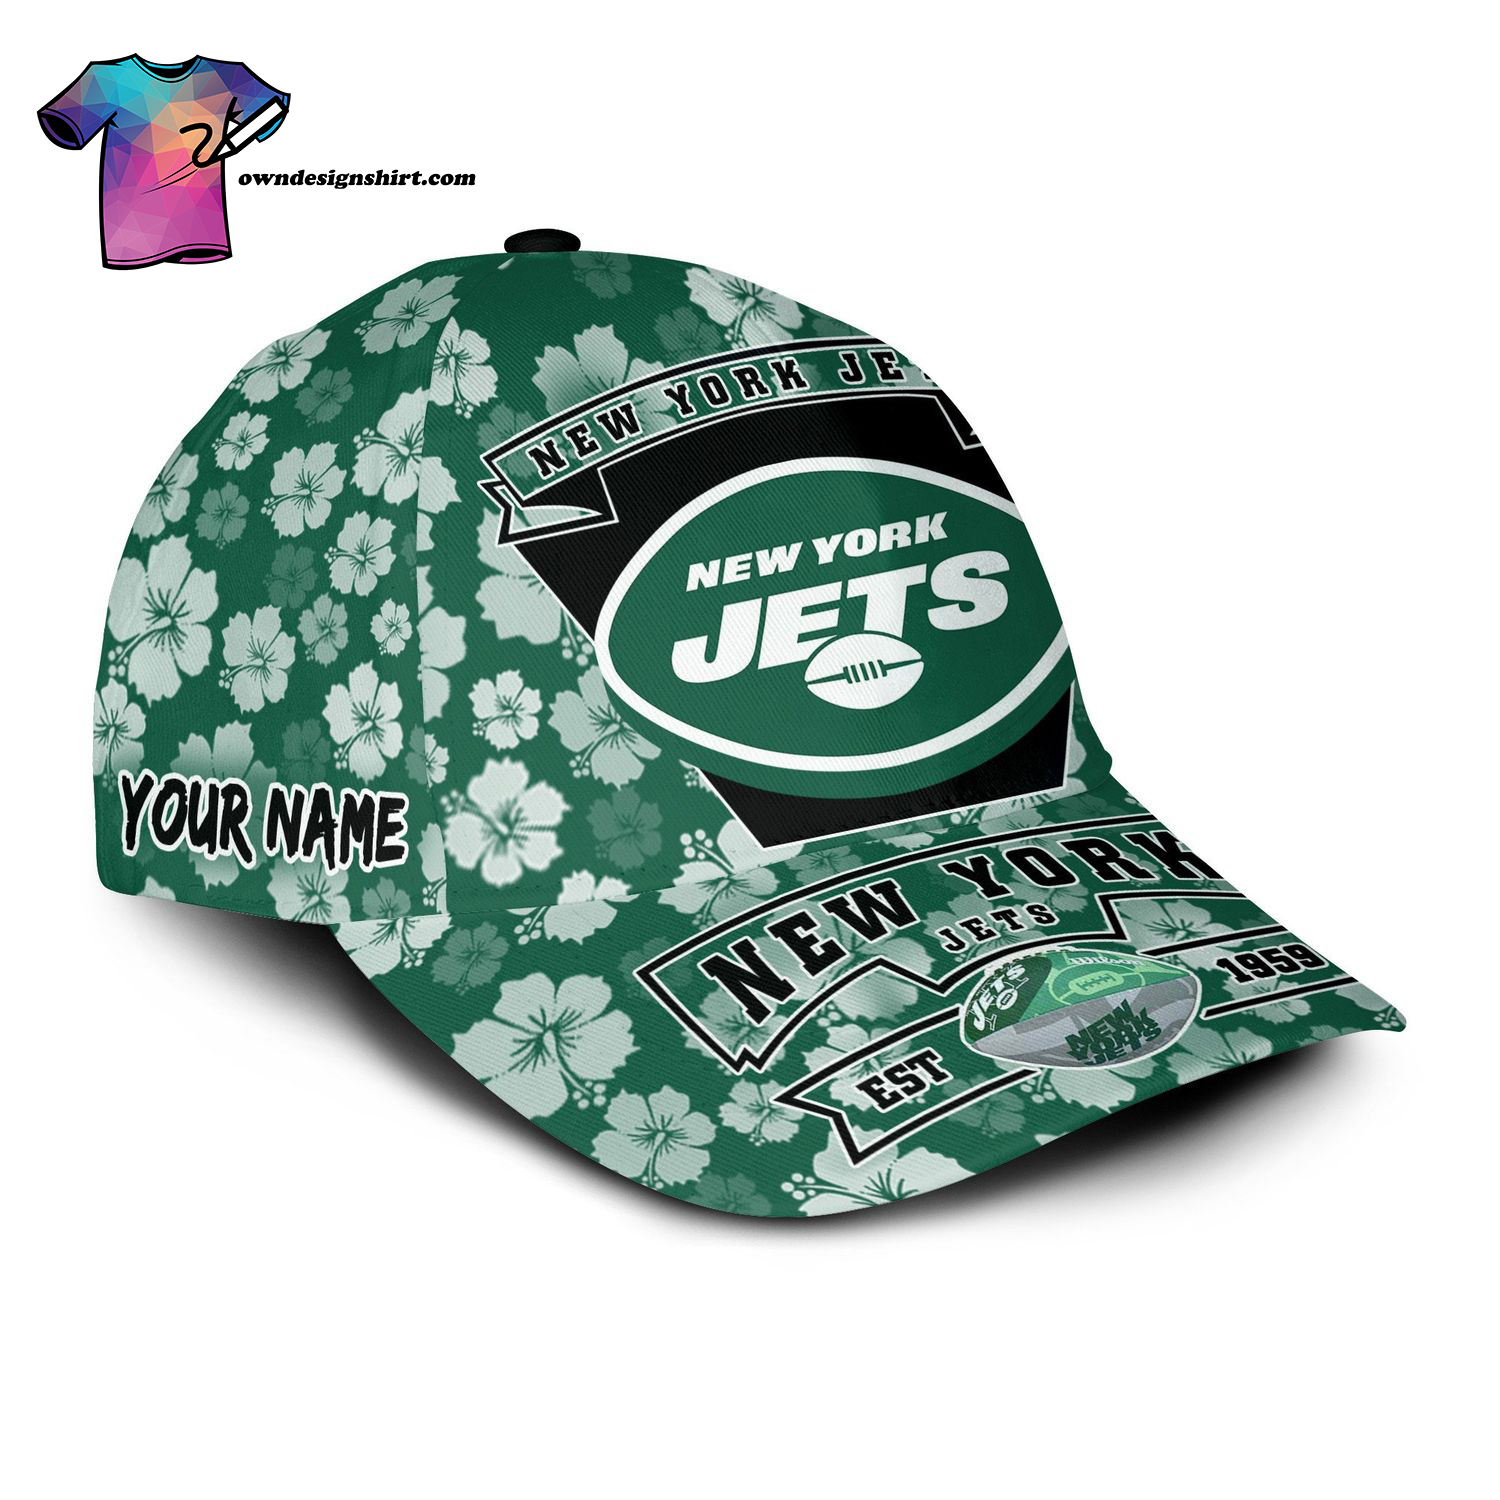 The best selling] NFL New York Jets Floral Summer Classic Baseball Cap